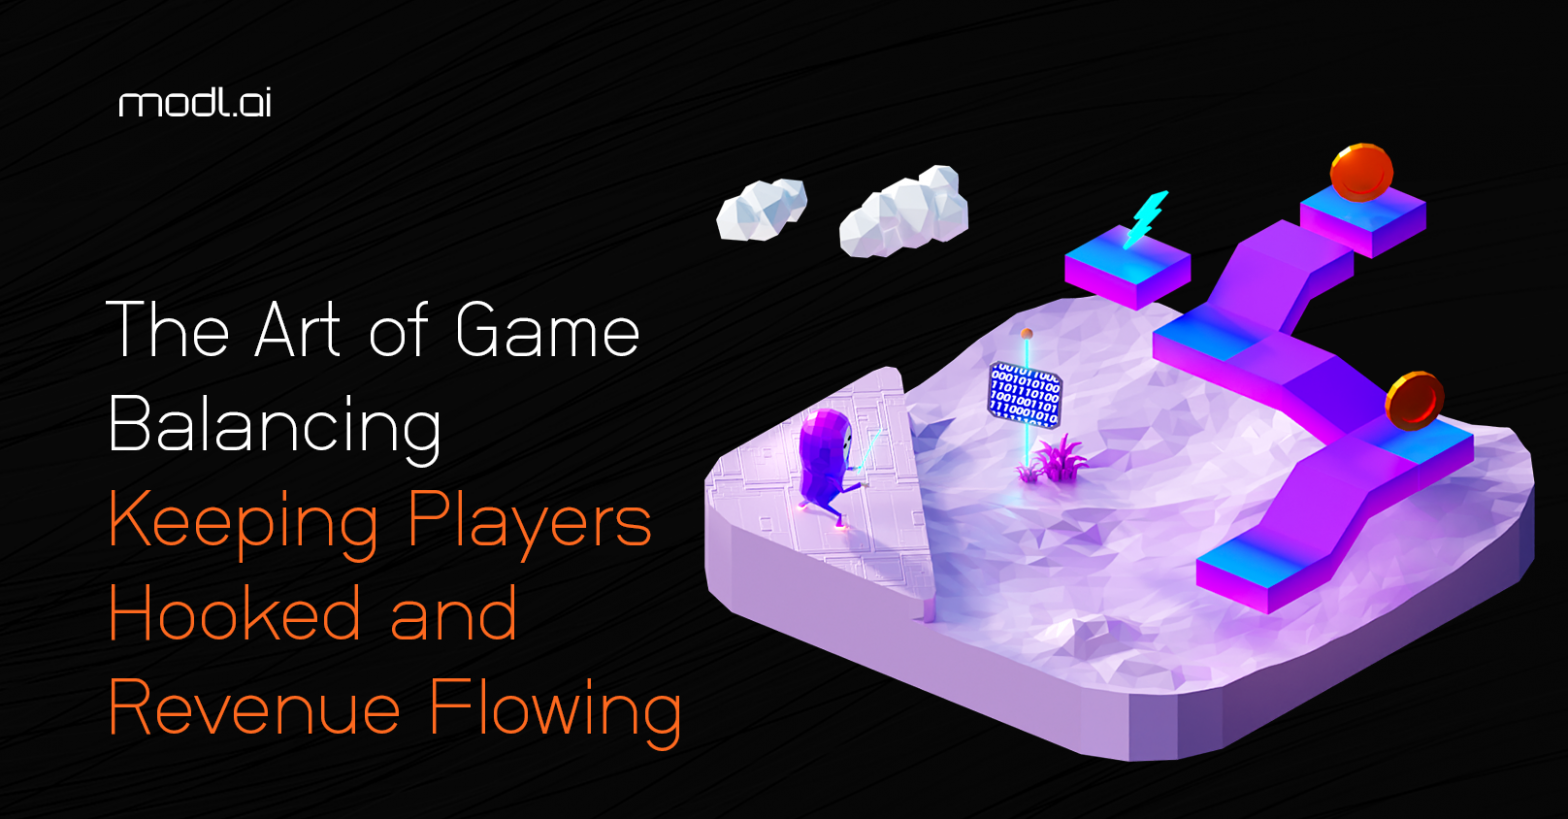 The Art of Game Balancing Keeping Players Hooked and Revenue Flowing